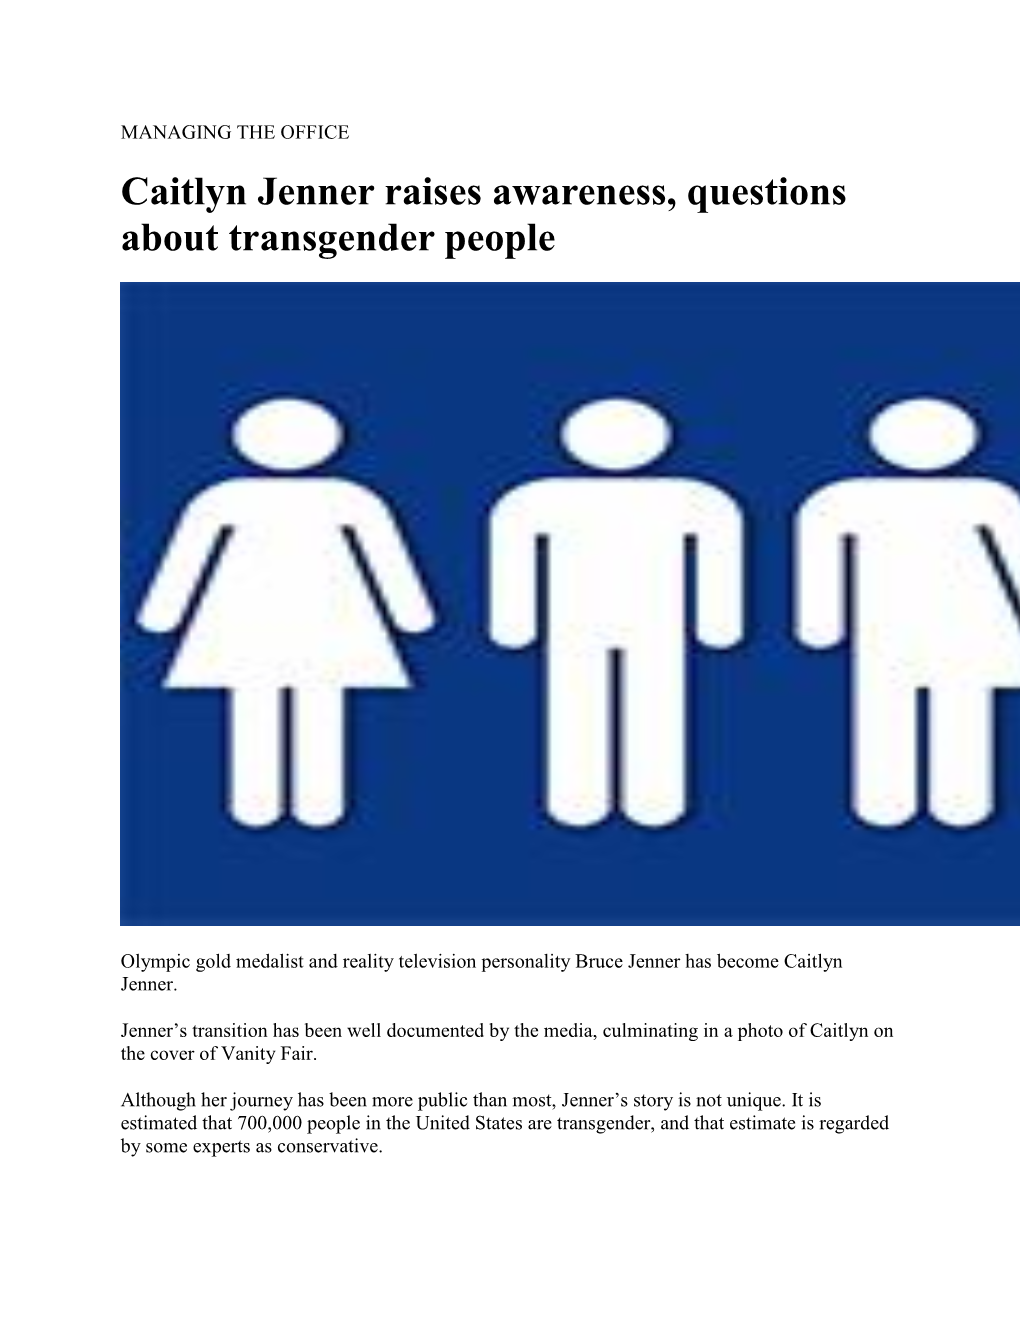 Caitlyn Jenner Raises Awareness, Questions About Transgender People